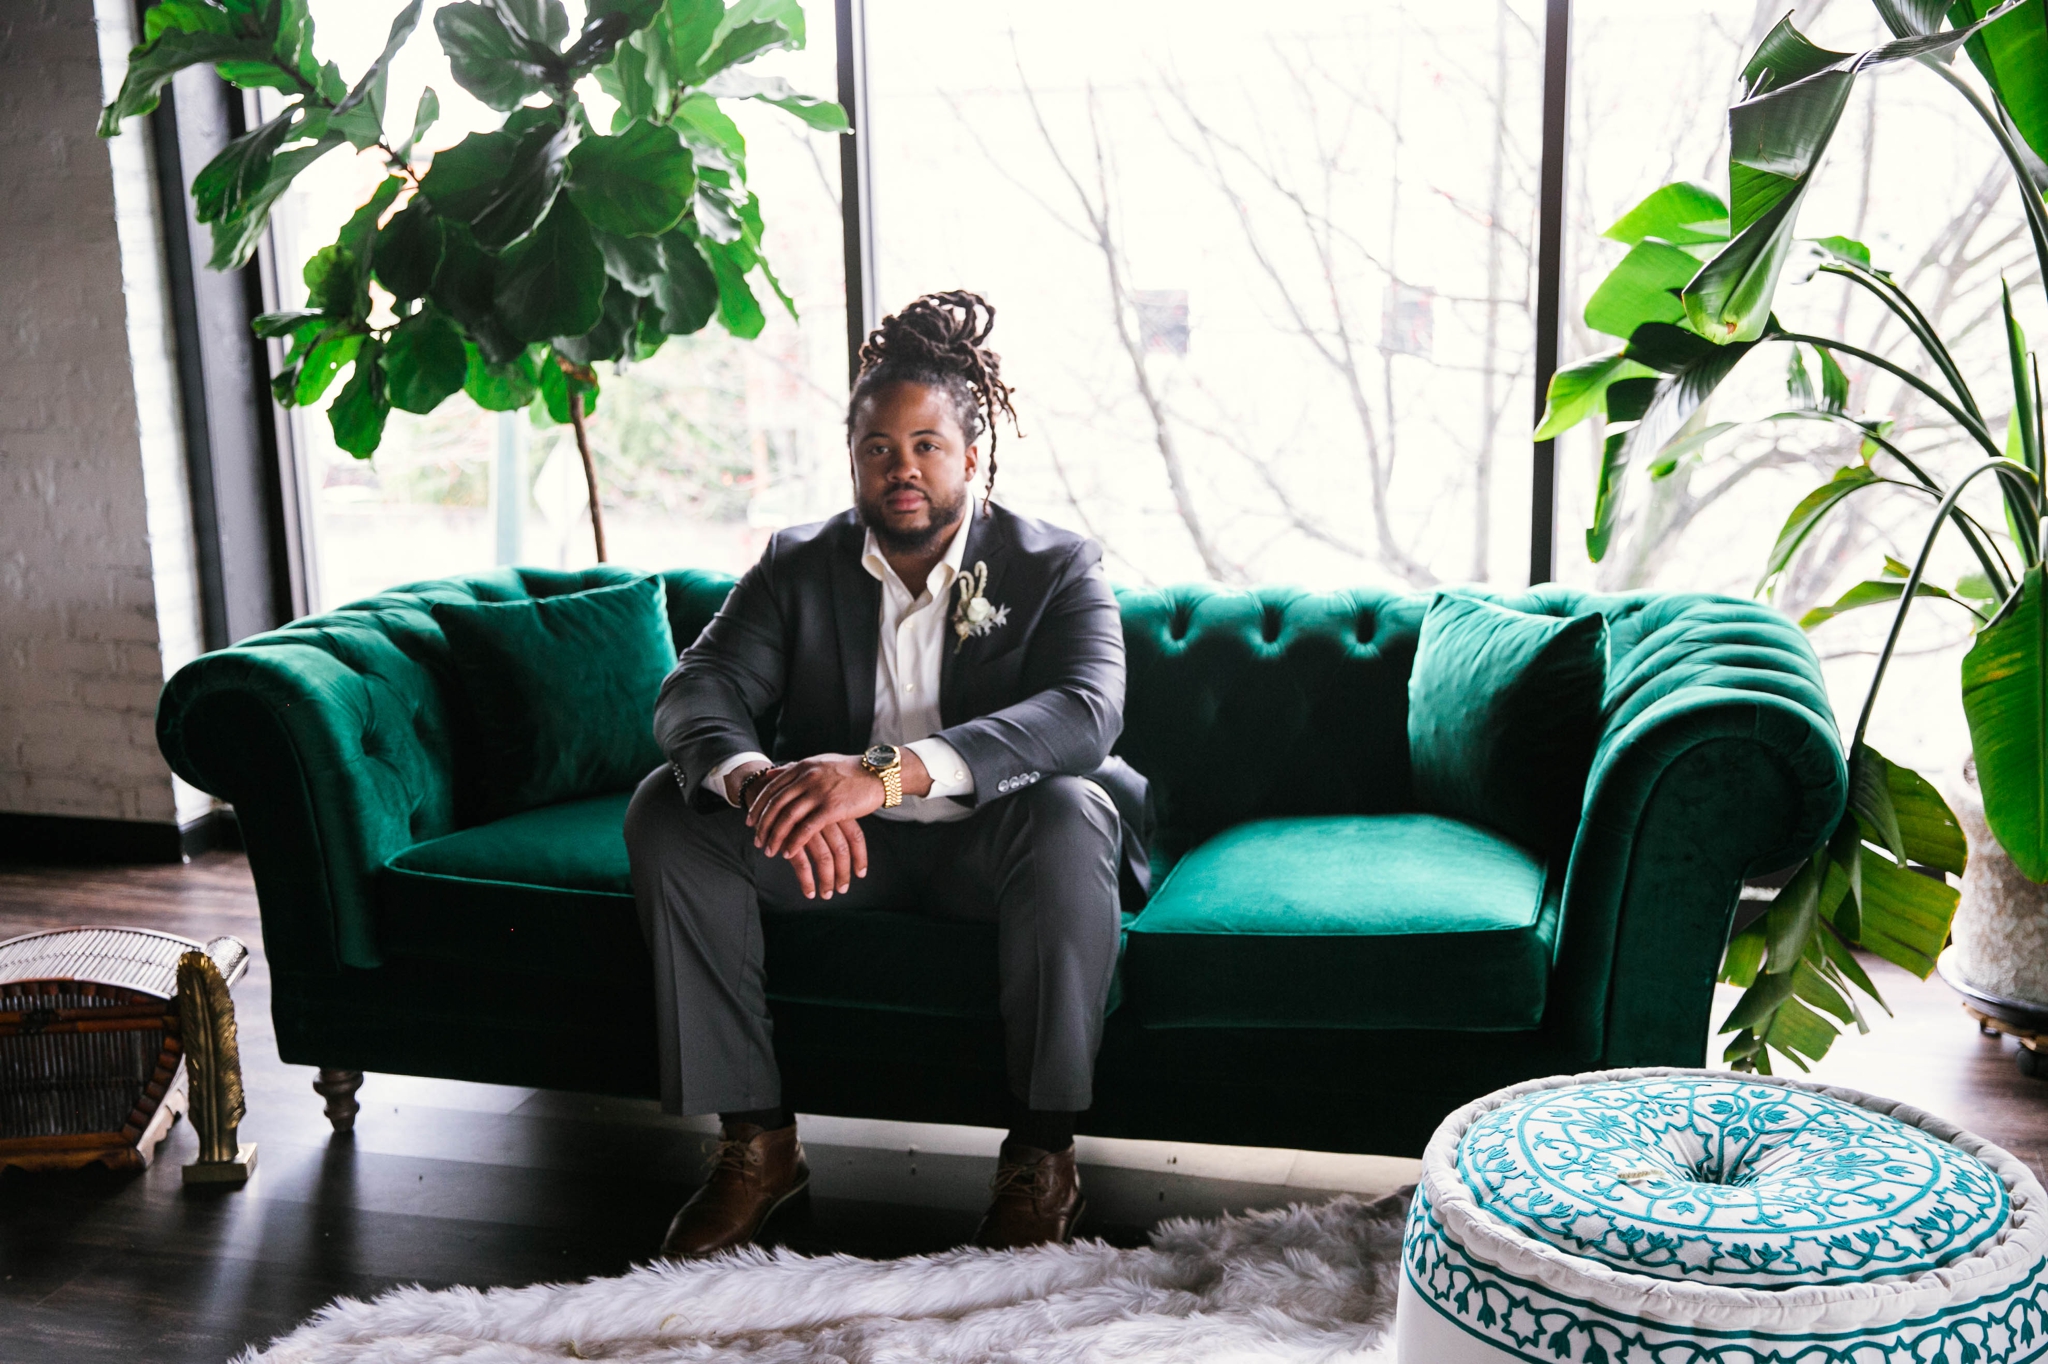  Indoor Natural light portrait of a black groom sitting on an emerald tufted sofa - laughing and having fun with each other- flowers in natural african american hair - oahu hawaii wedding photographer 